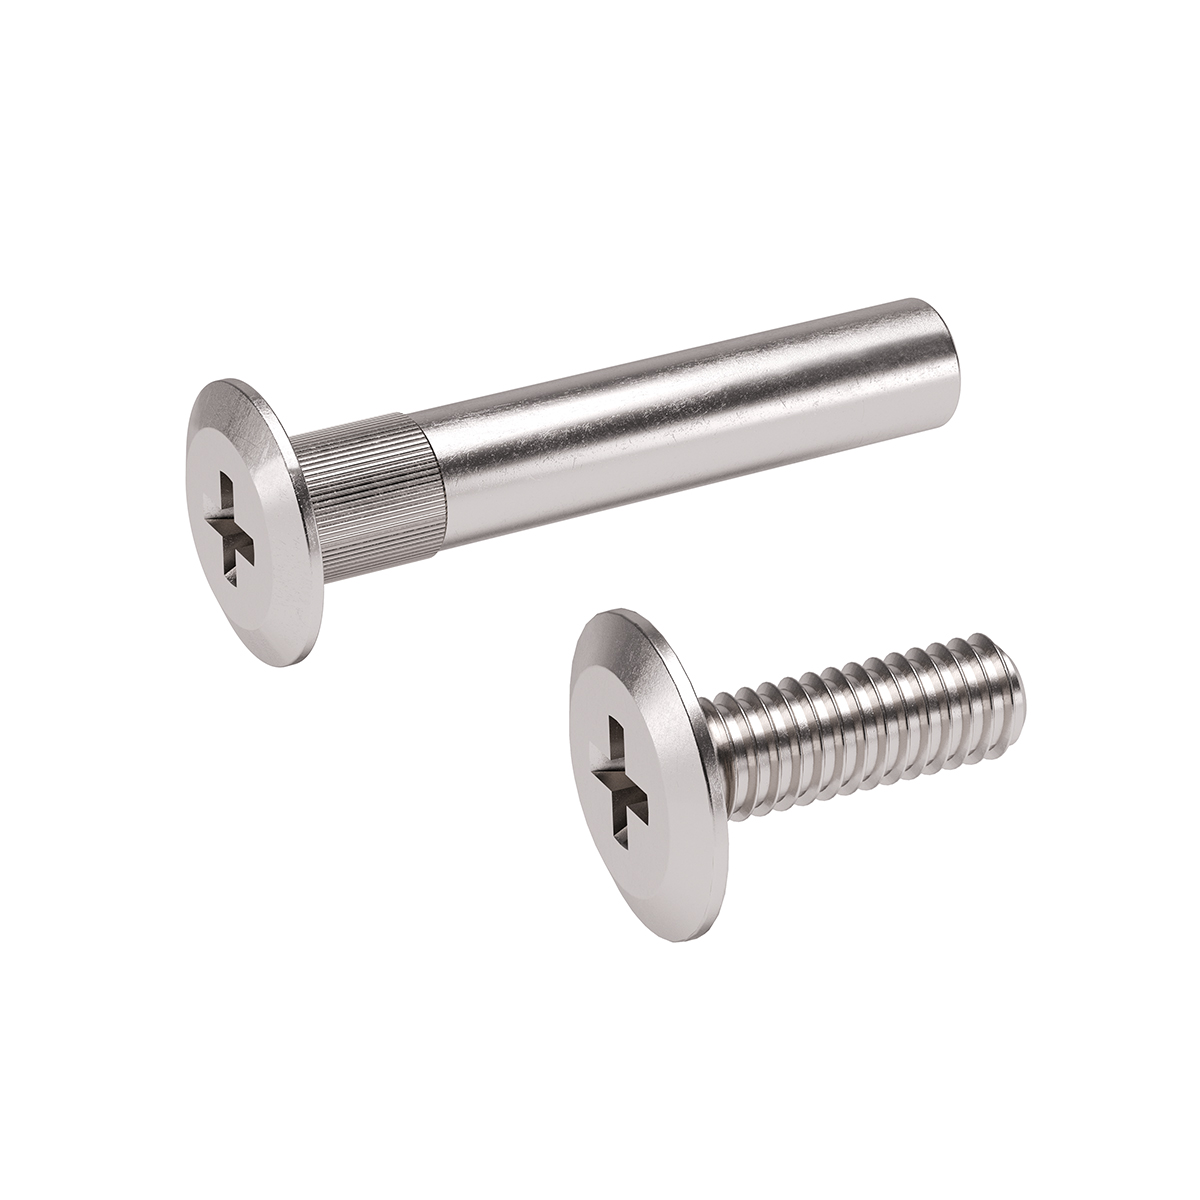 Cabinet Connecting Screw Kit